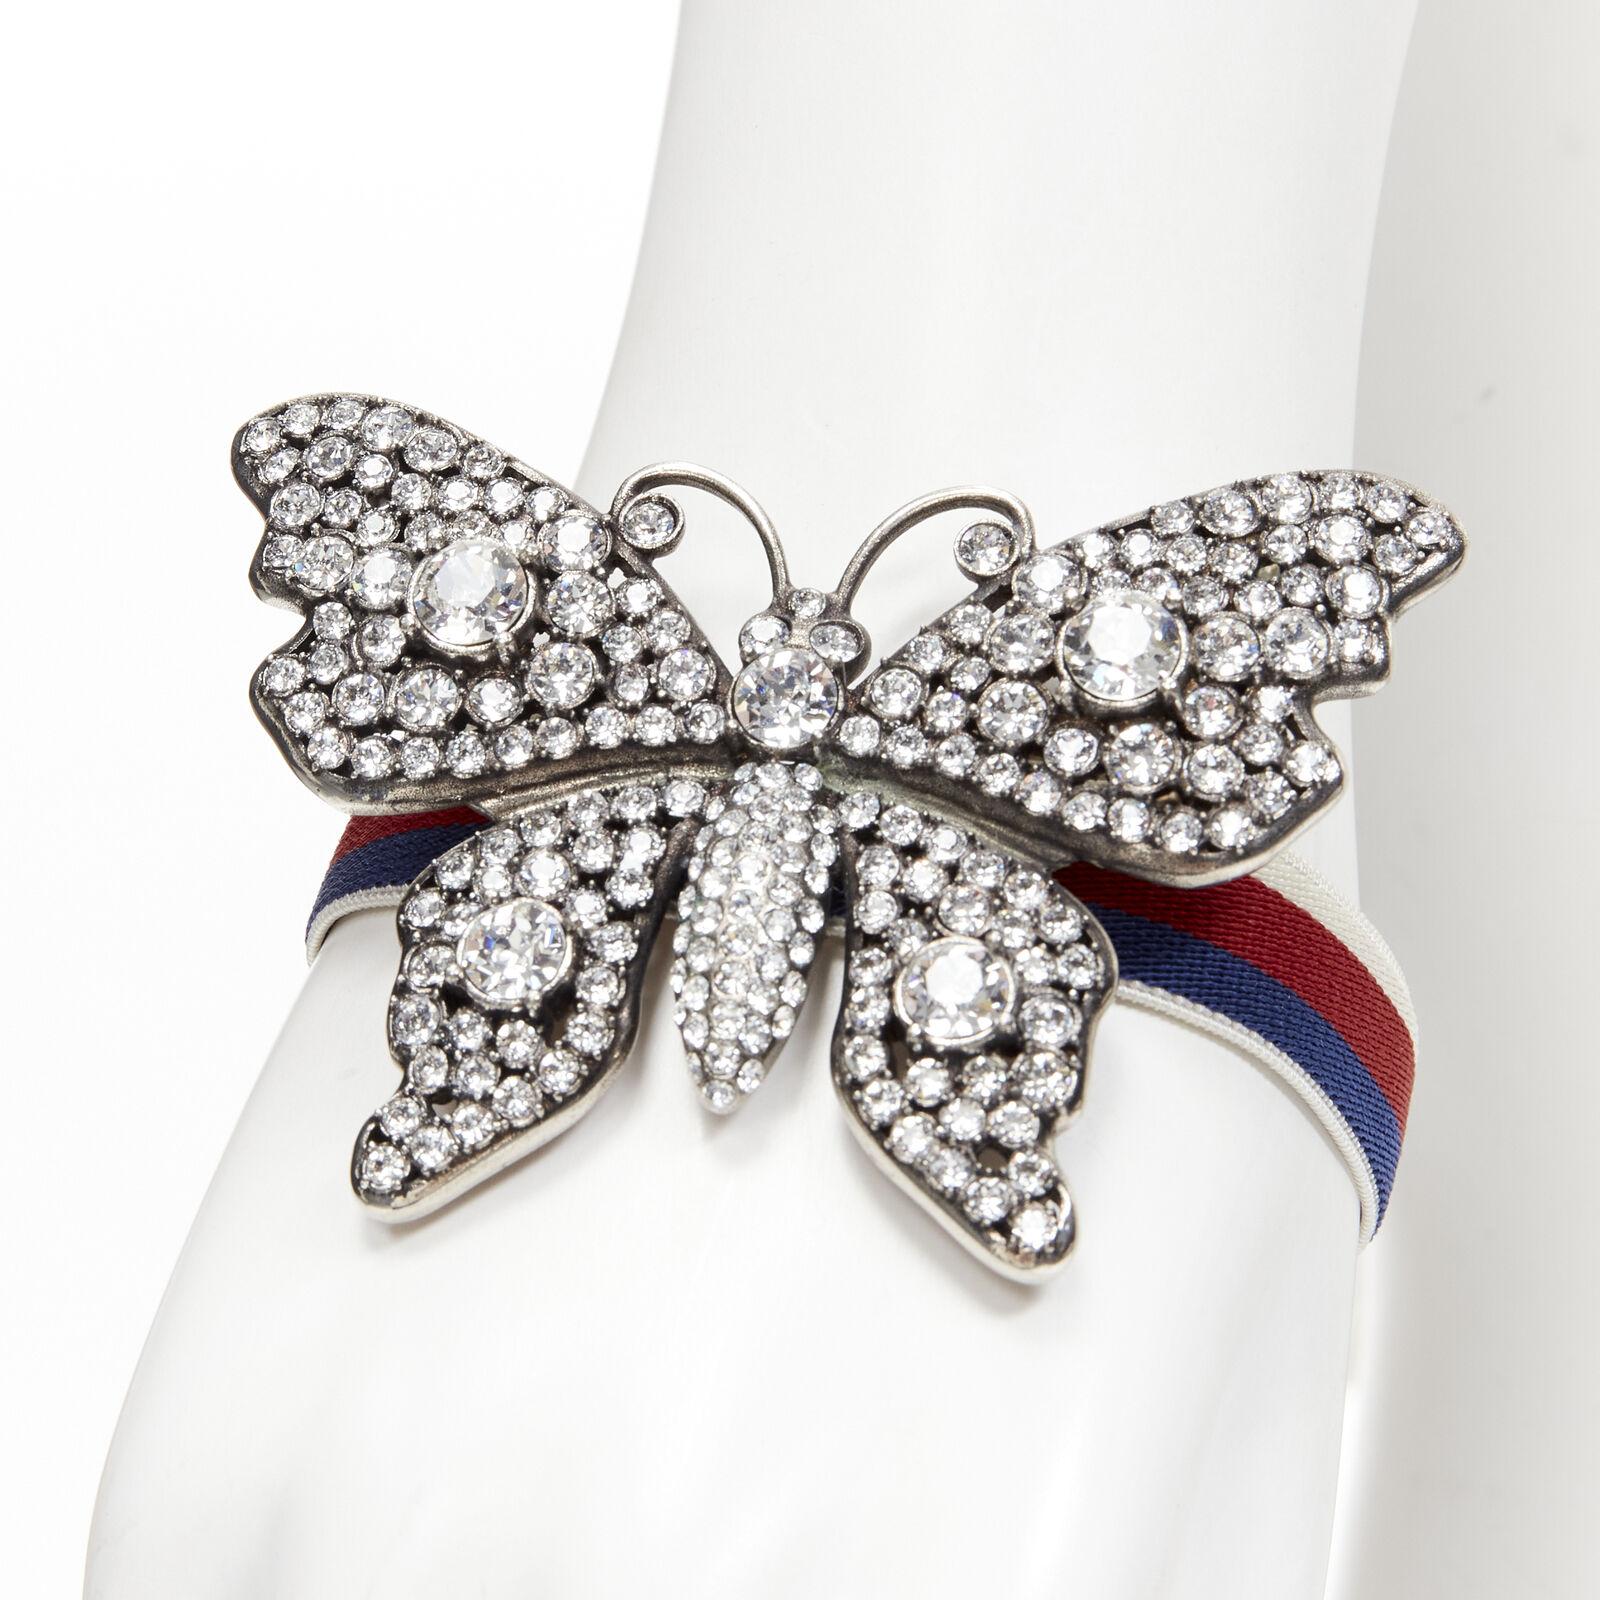 new GUCCI ALESSANDRO MICHELE antique silver crystal Butterfly web strap bracelet
Reference: TGAS/C01517
Brand: Gucci
Designer: Alessandro Michele
Model: 504656 I3N78 8518
Material: Metal, Fabric
Color: Silver
Pattern: Solid
Closure: Stretchy
Extra